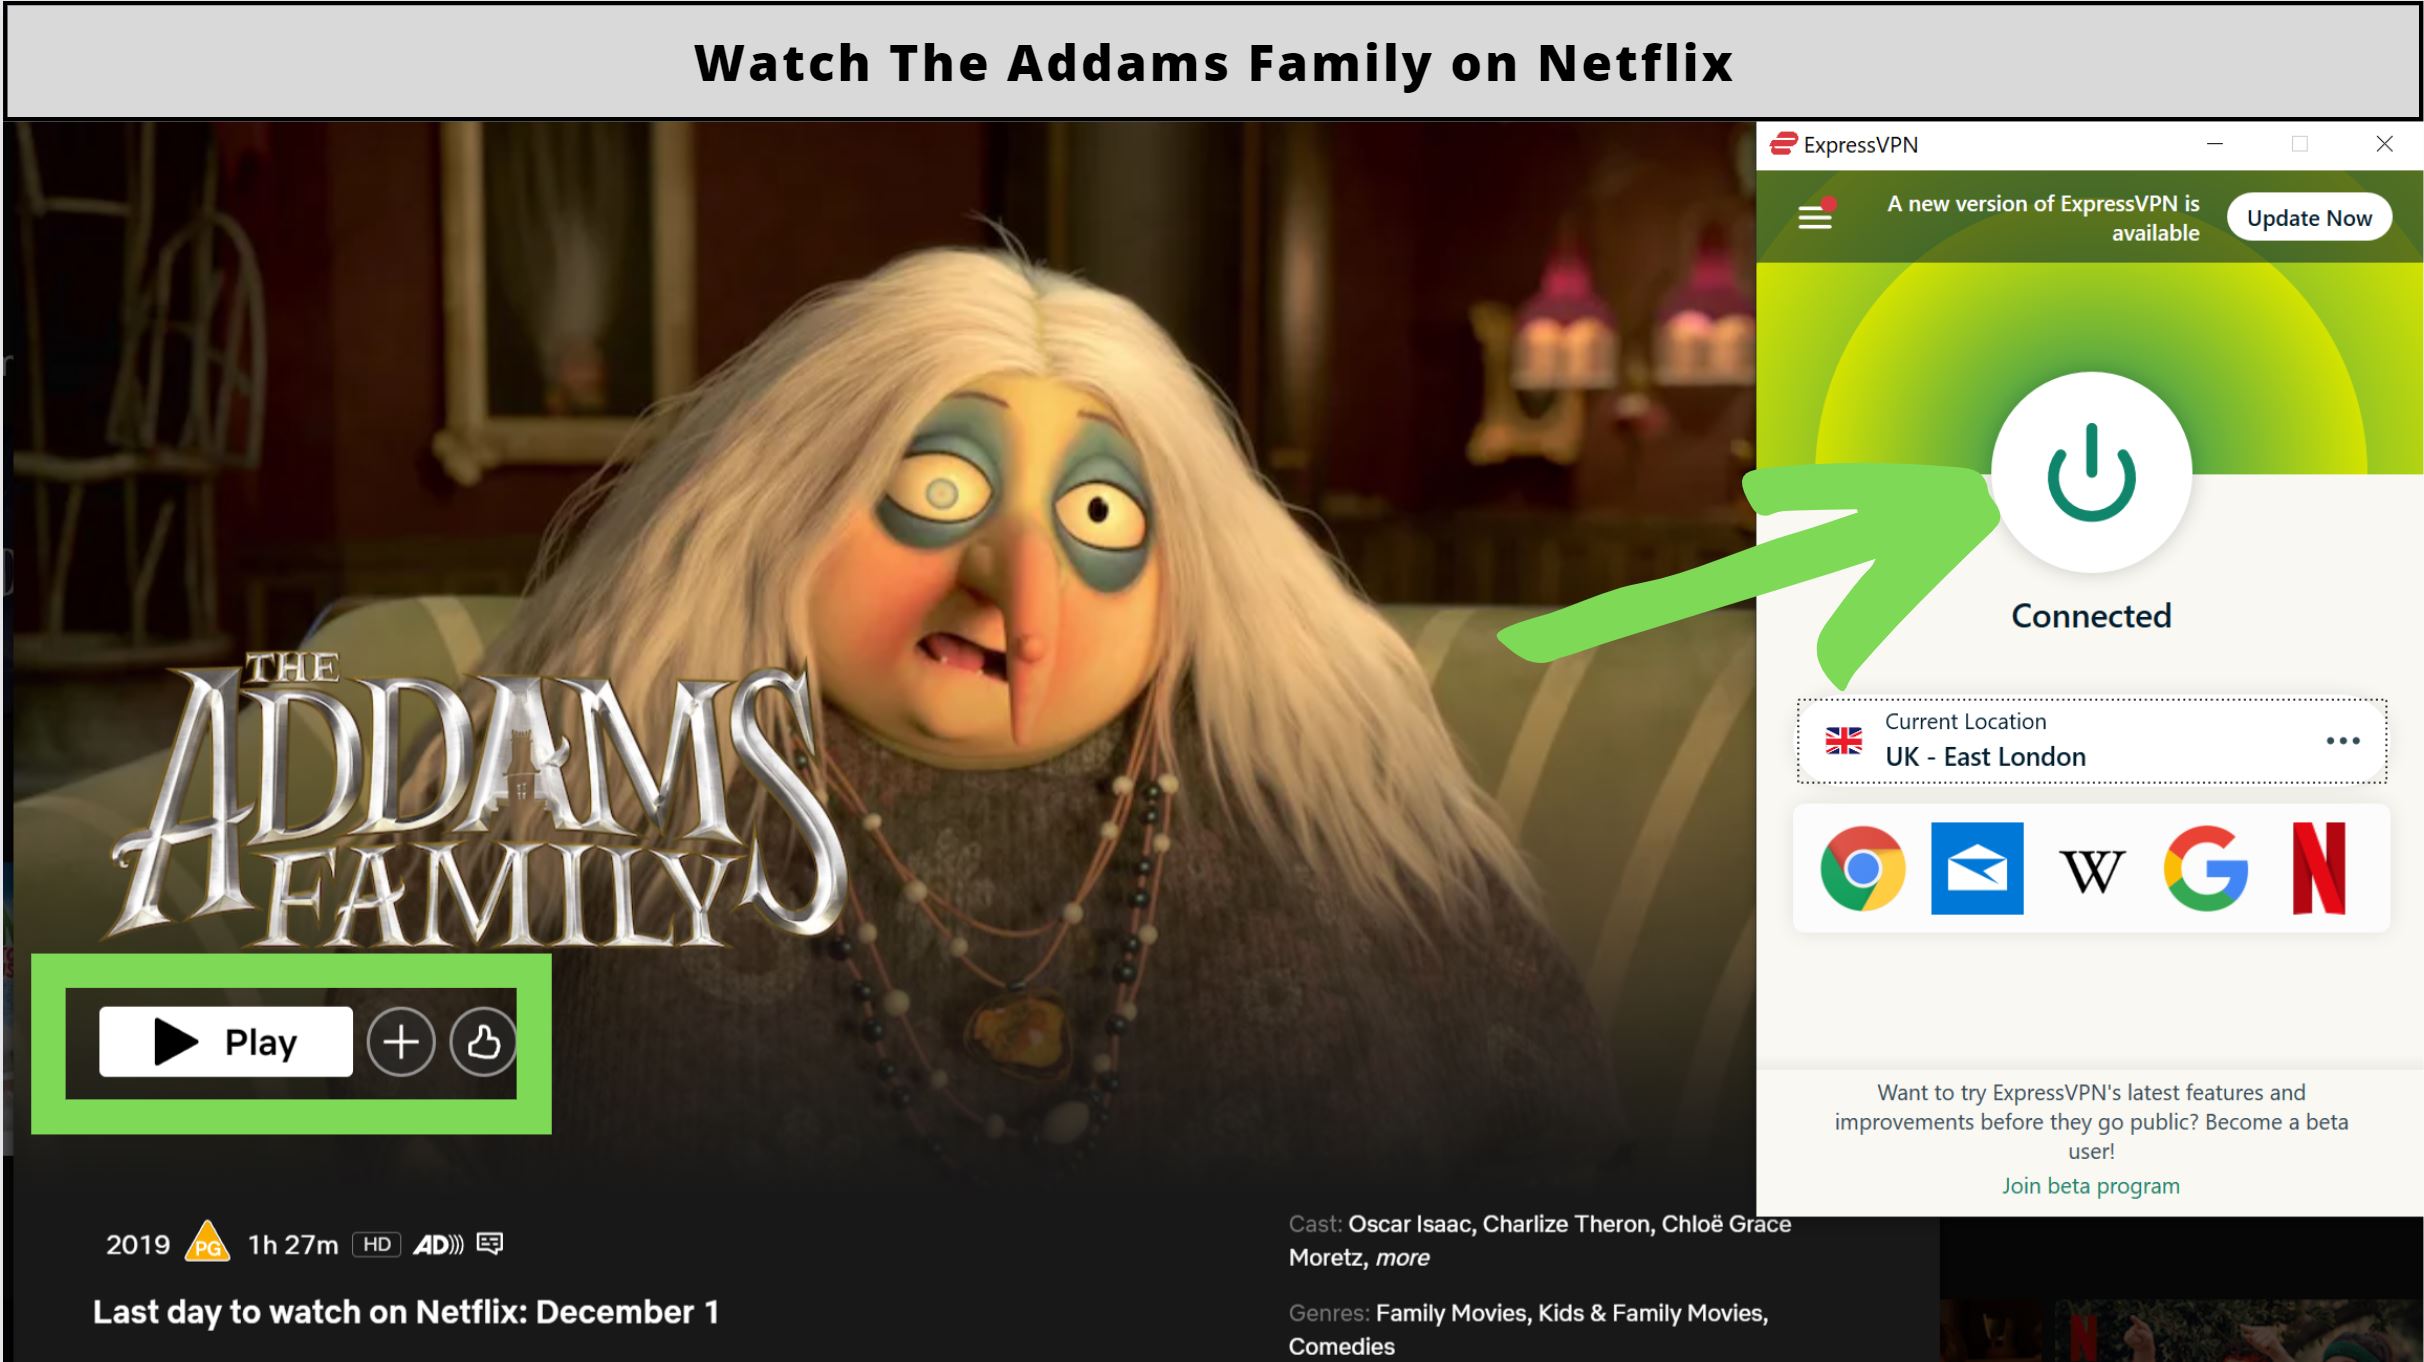 How To Watch The Addams Family On Netflix| Learn In 2min